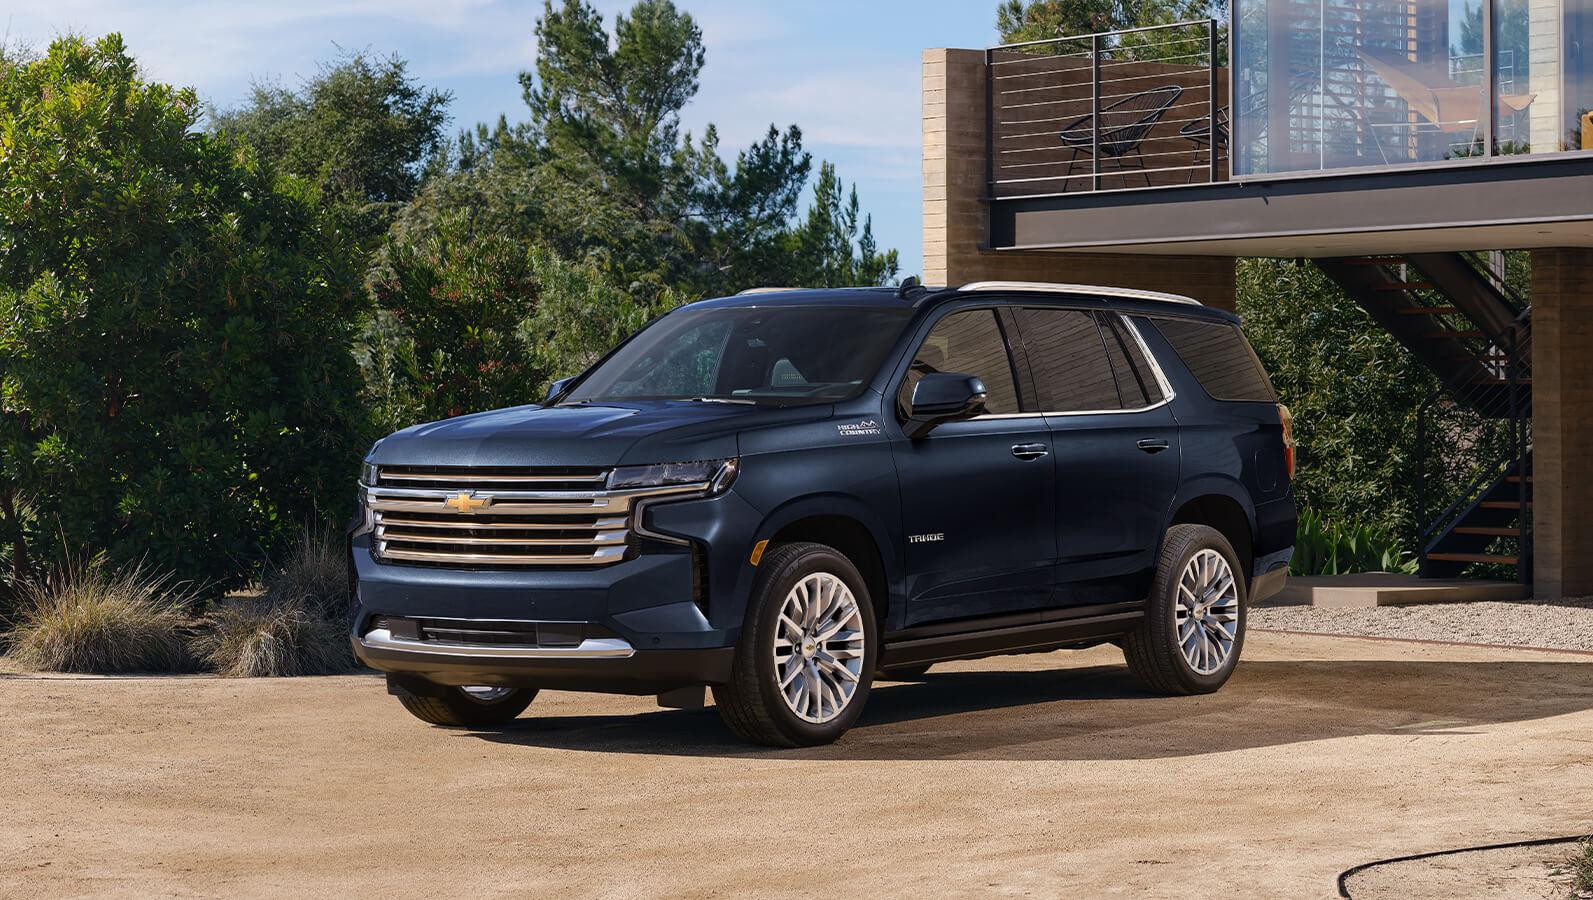 New Chevrolet from Tahoe 2023 West Chevrolet